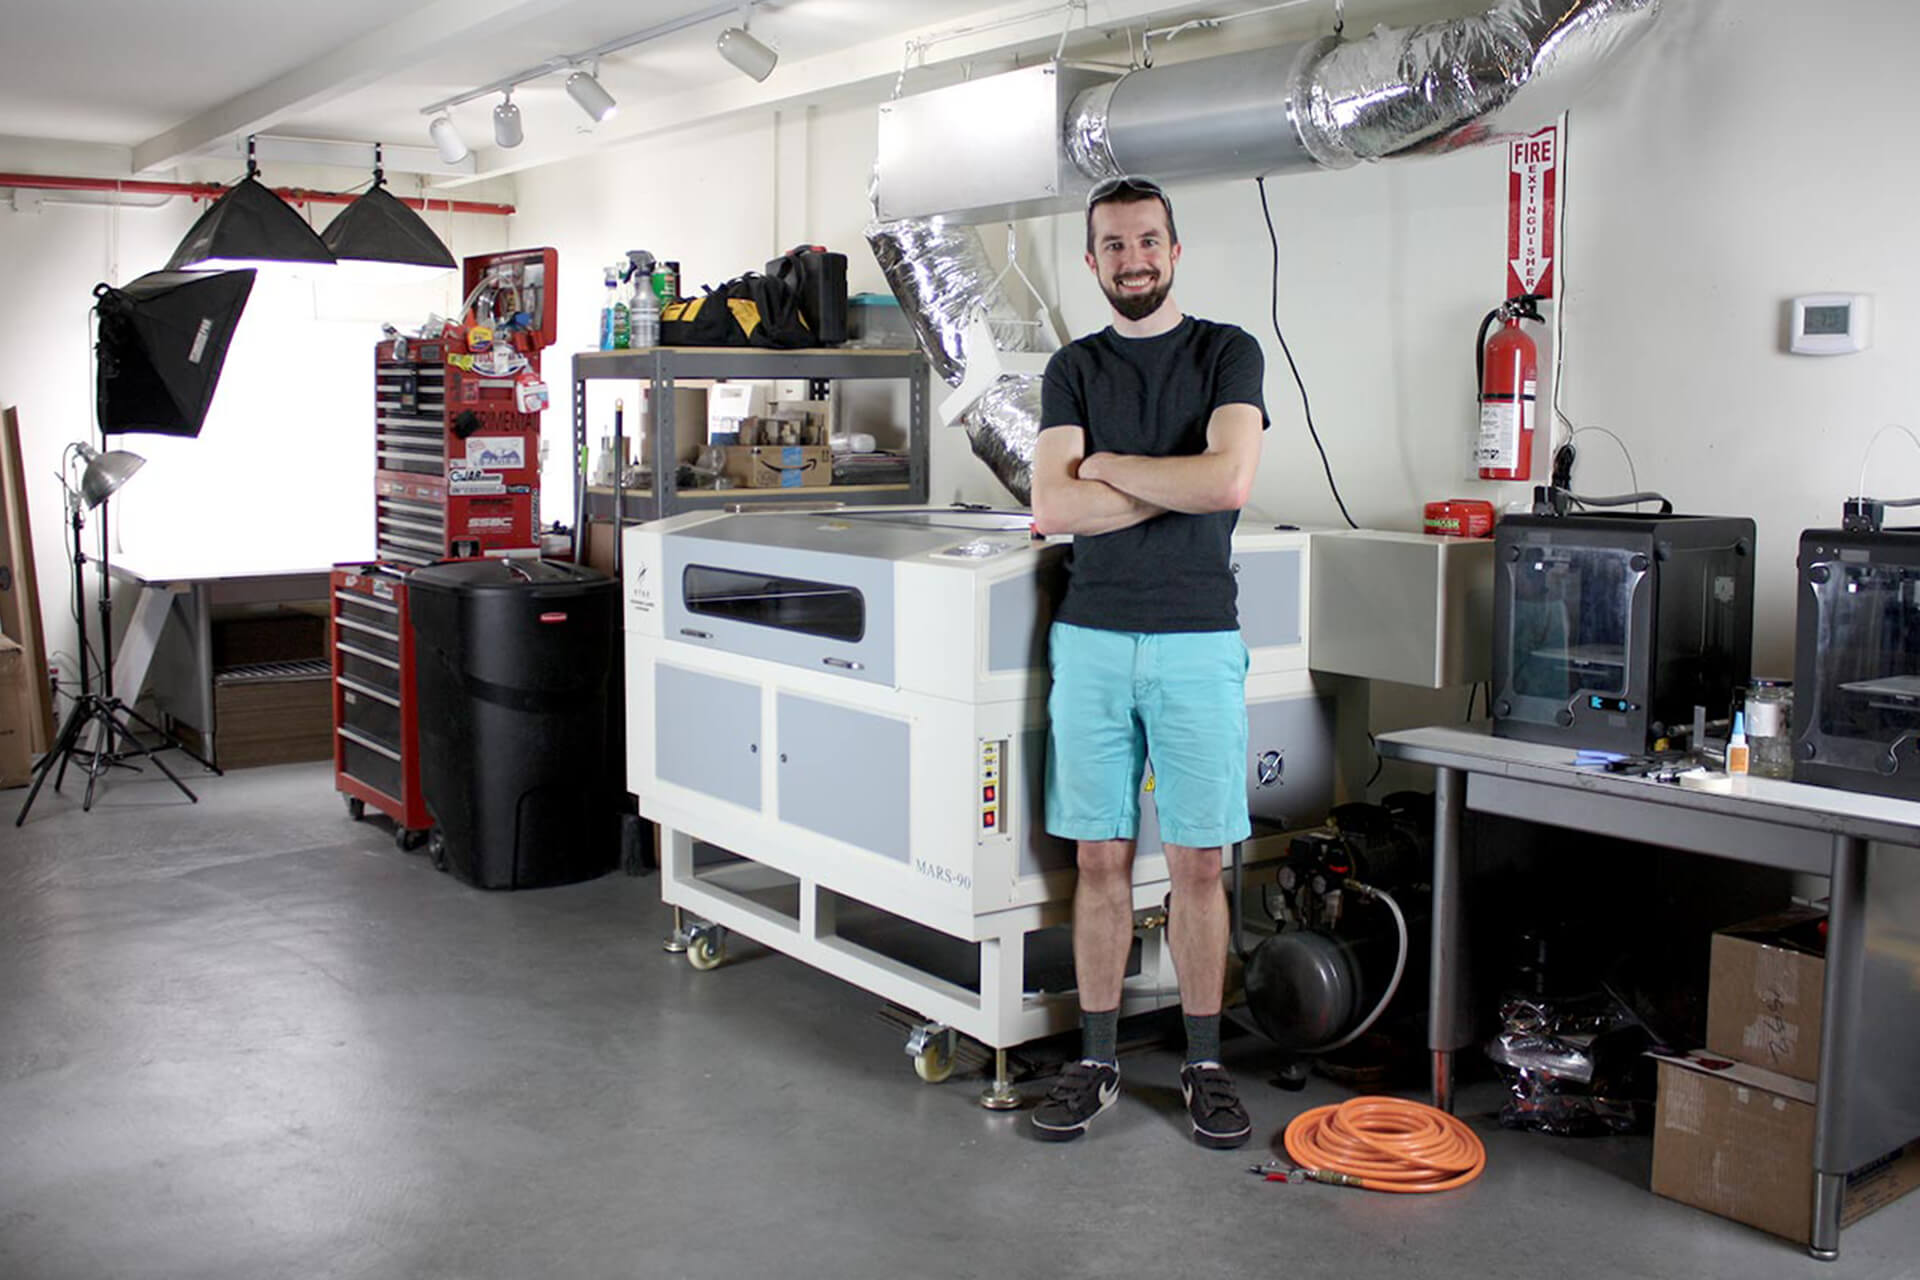 Joshua Tulberg in the Rapid Whale laser cutting and 3d printing shop